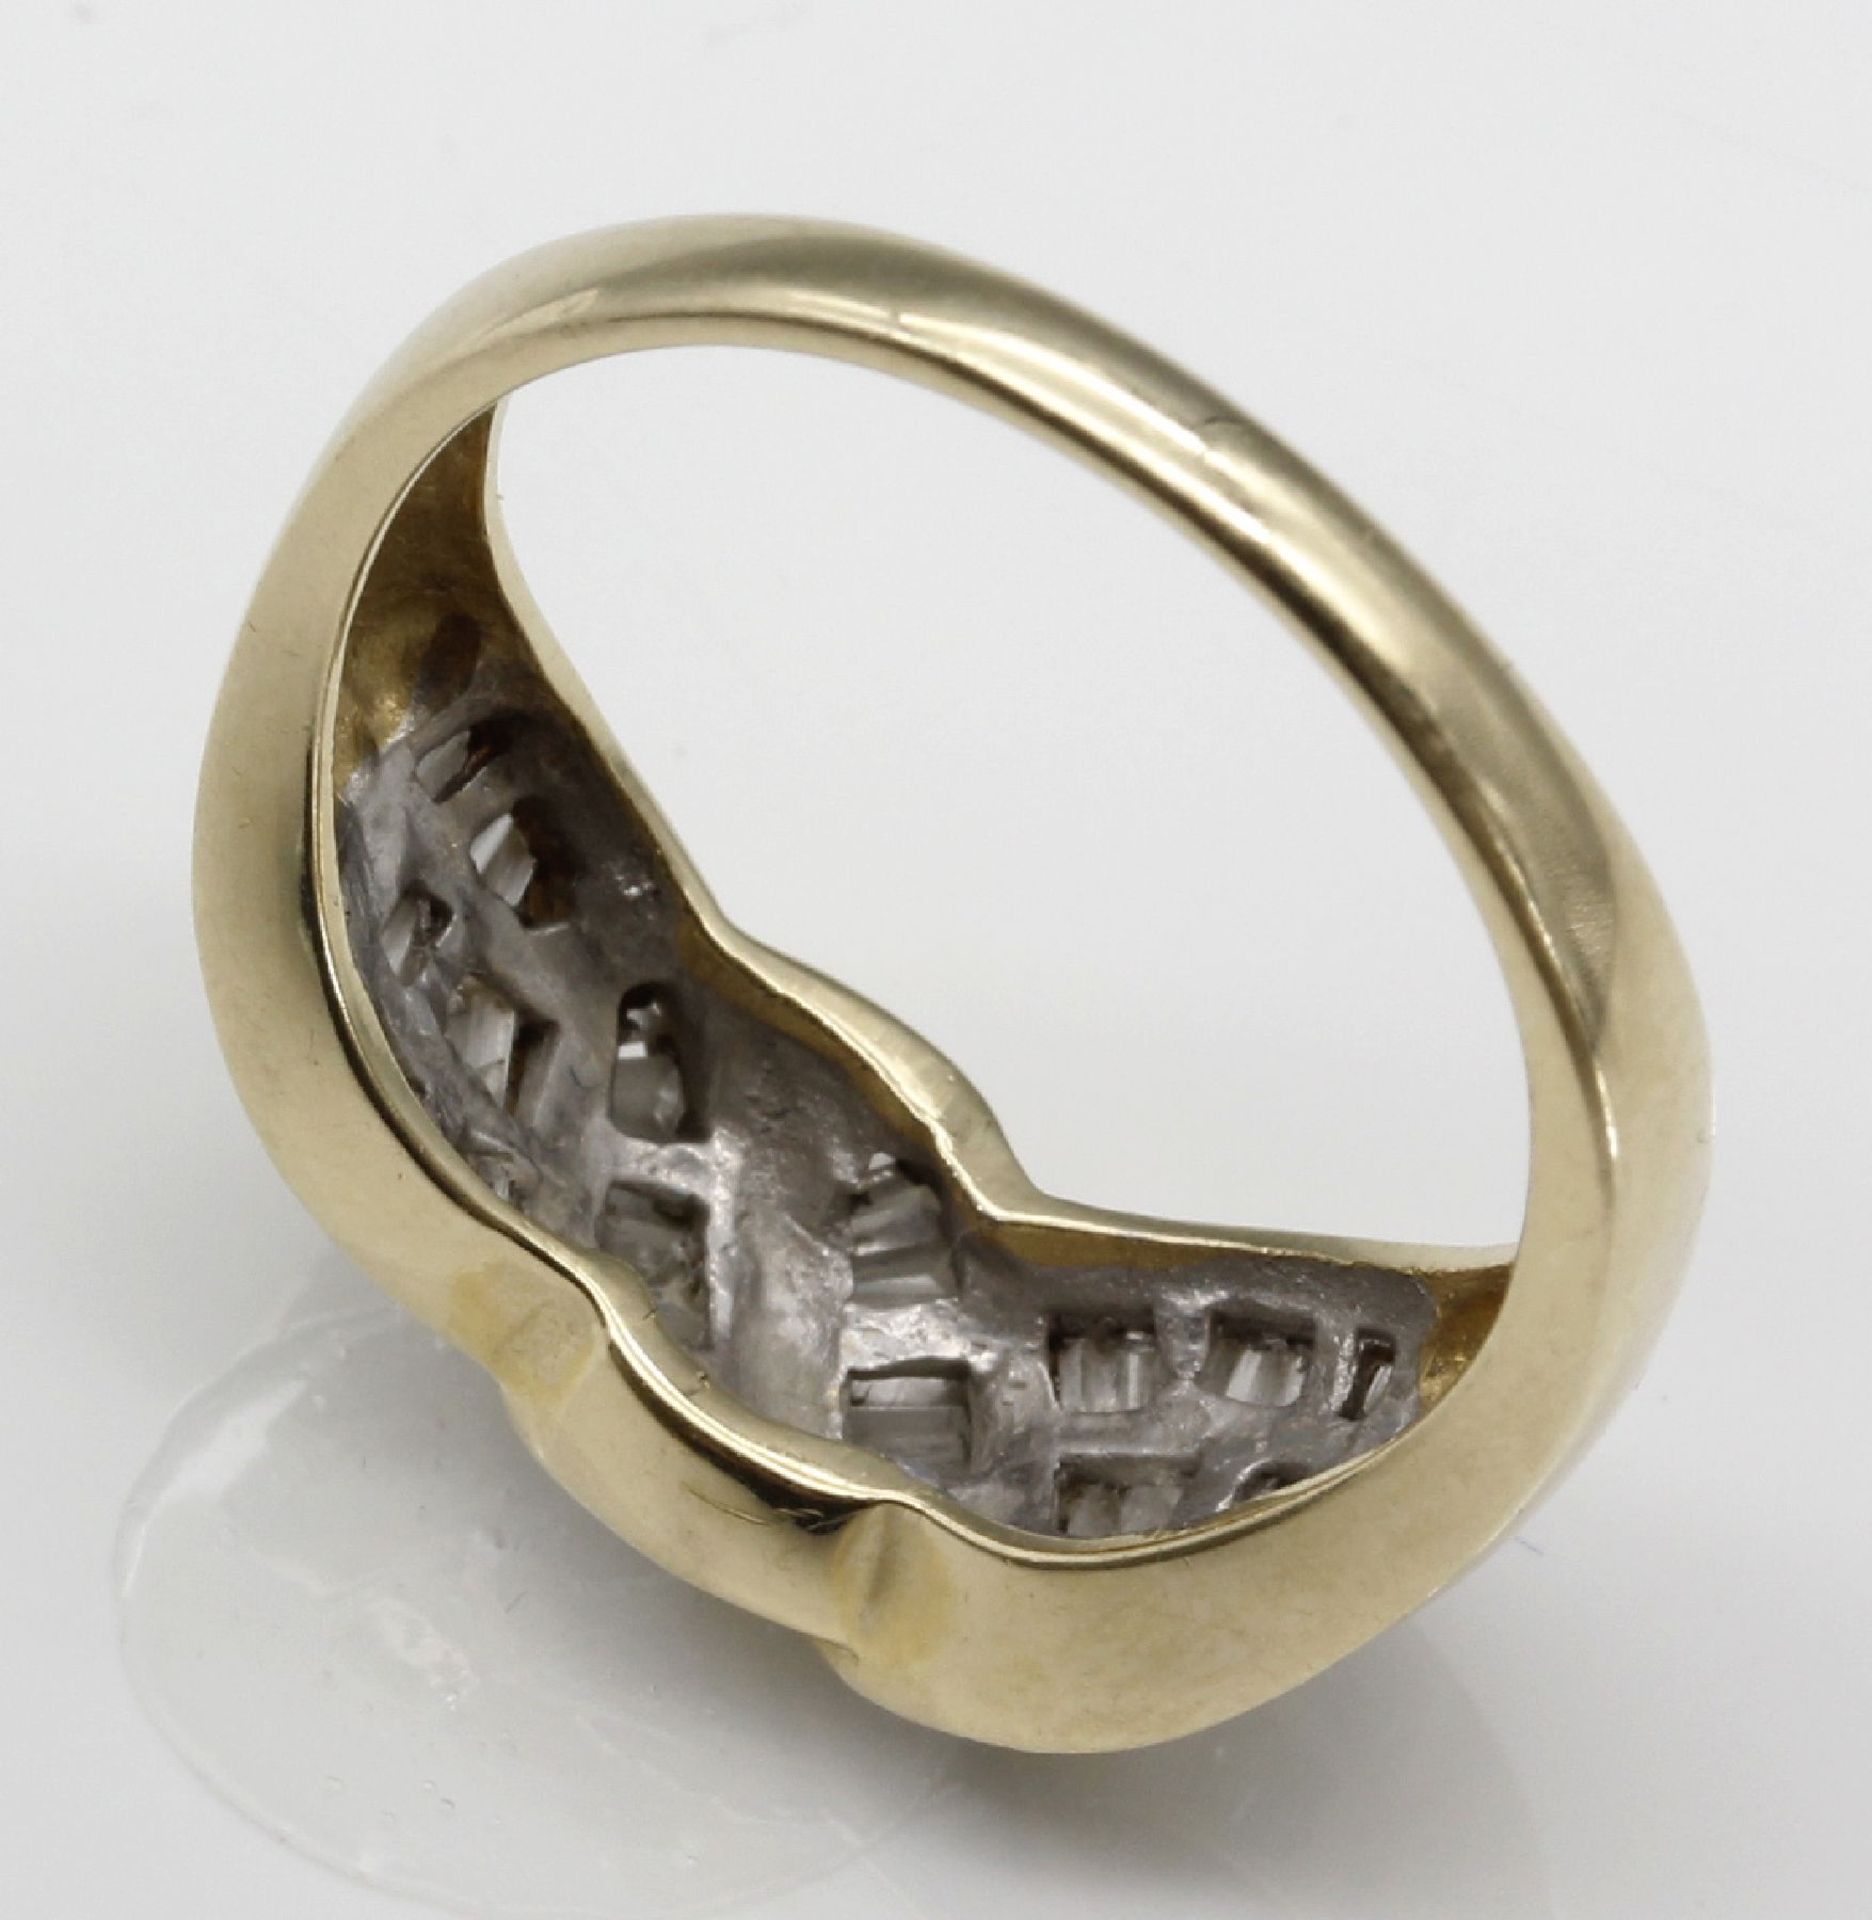 14 kt Gold Diamant-Ring, GG 585/000, 52 Diamantbaguettes - Image 4 of 4